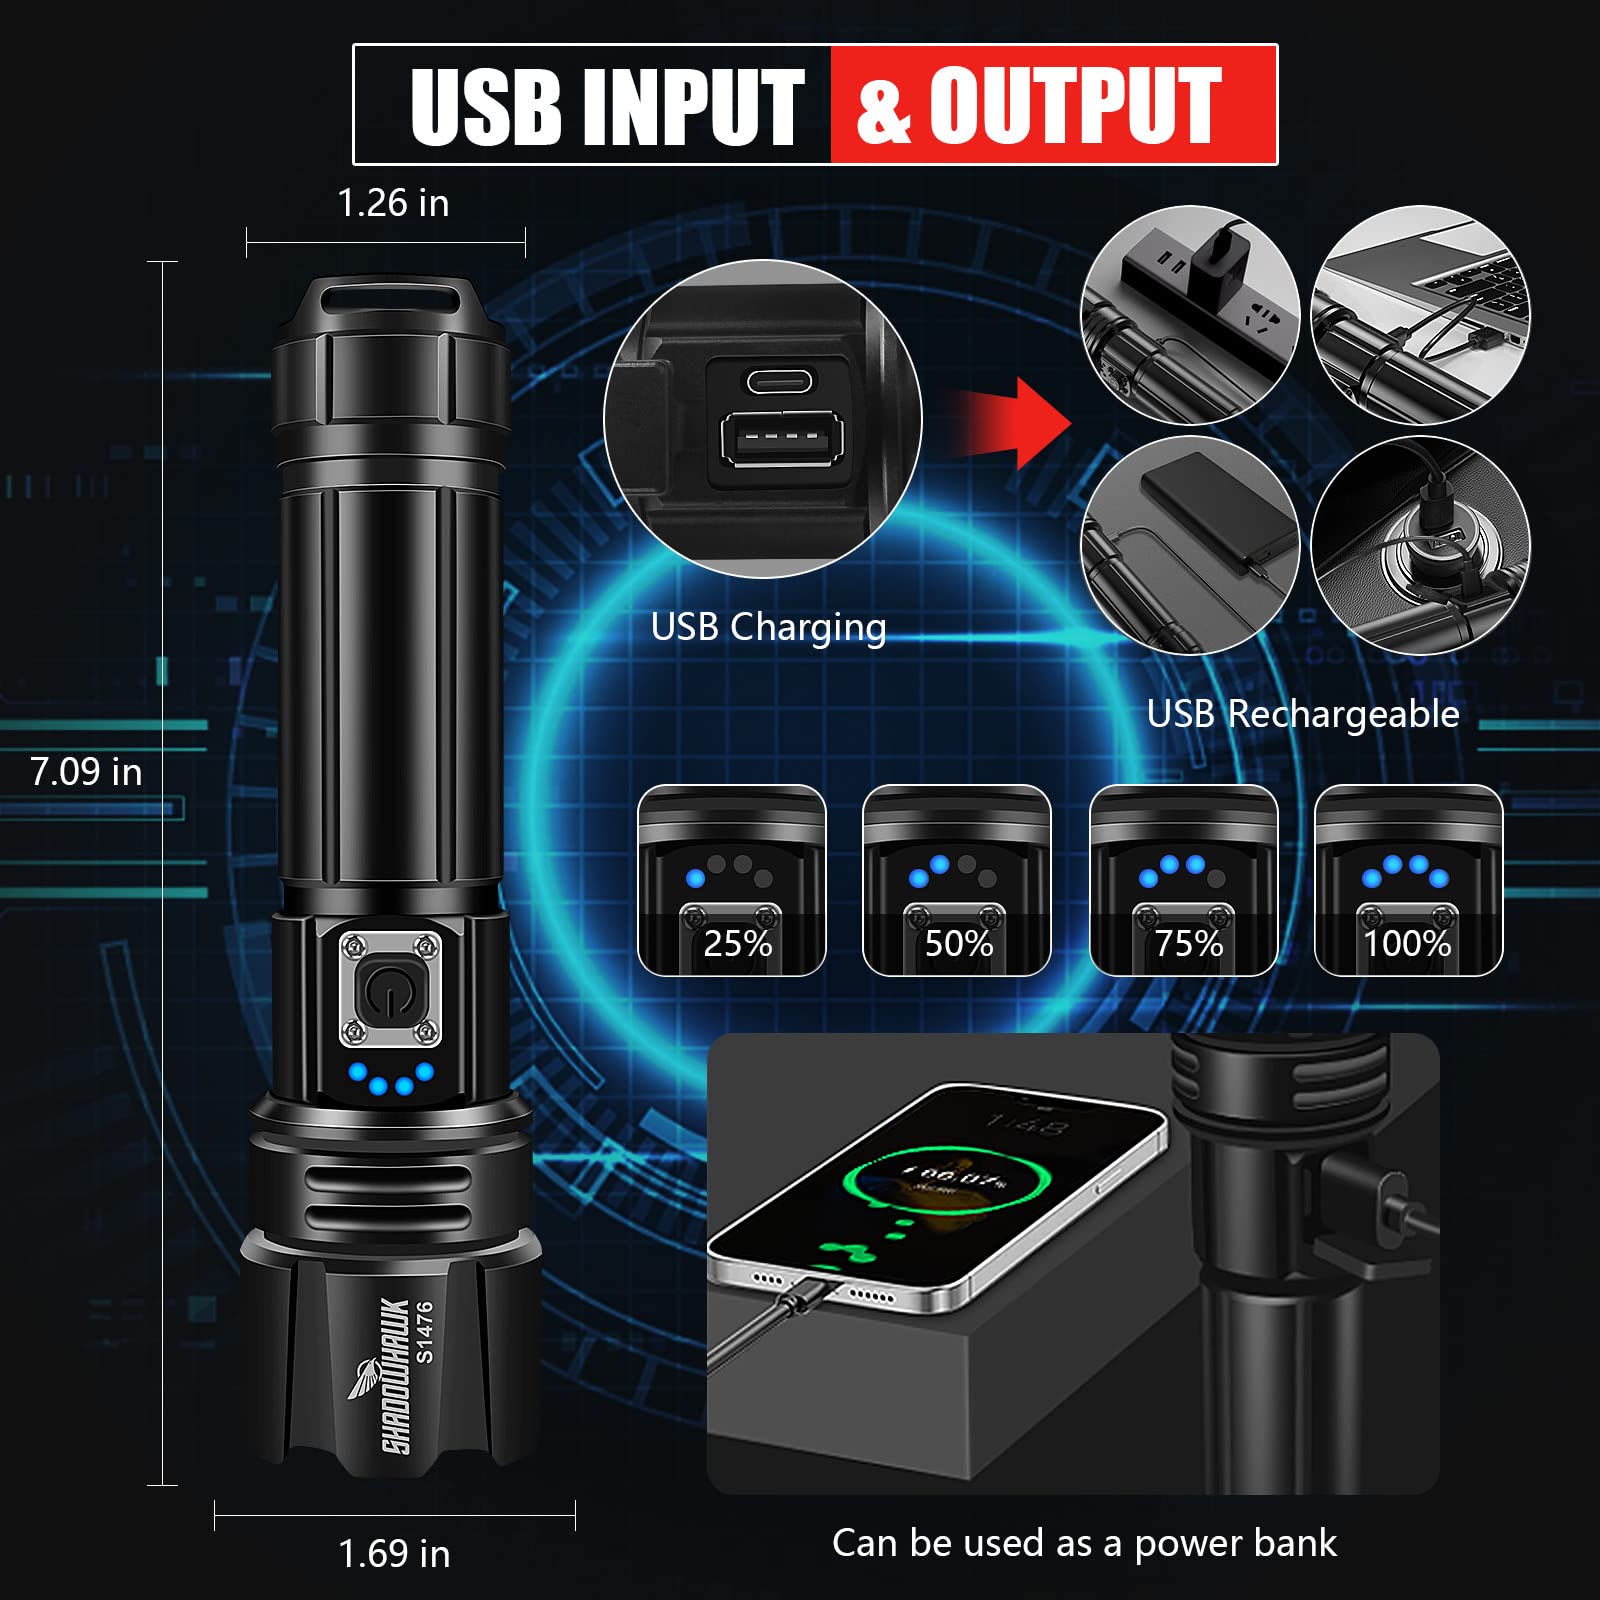 USB input & output torch can be used as power bank